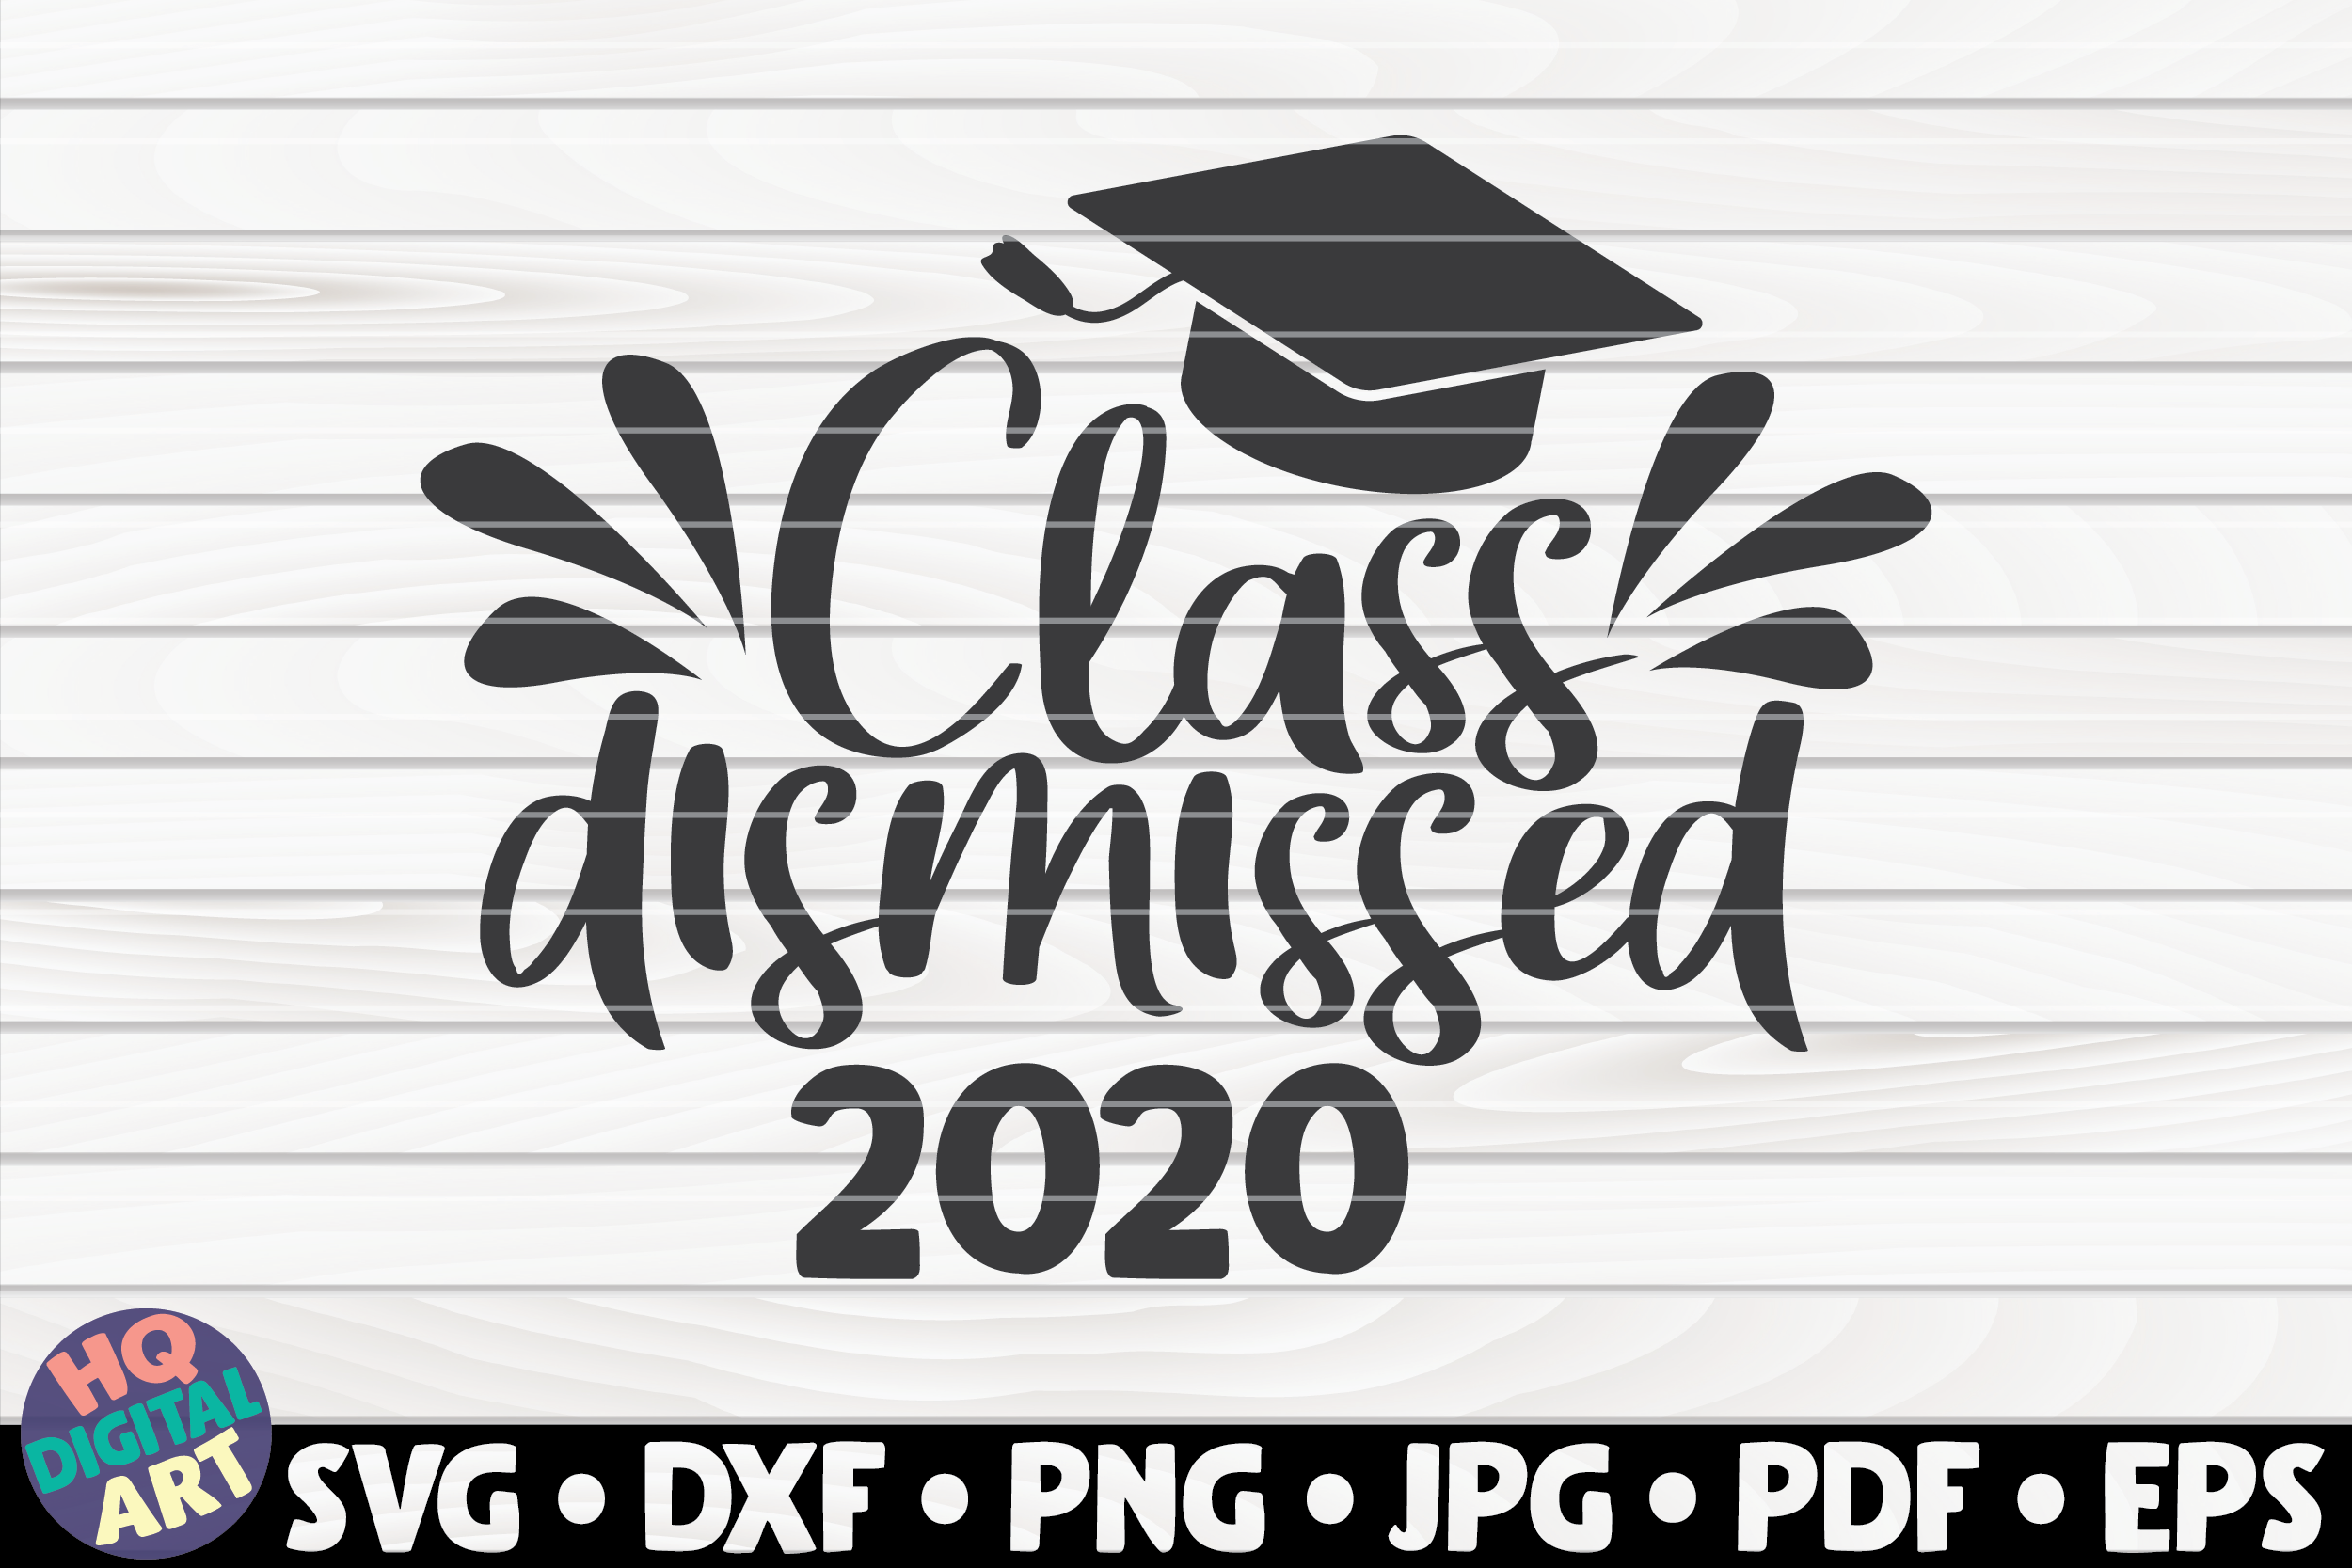 Class Dismissed 2020 Graphic By Mihaibadea95 · Creative Fabrica